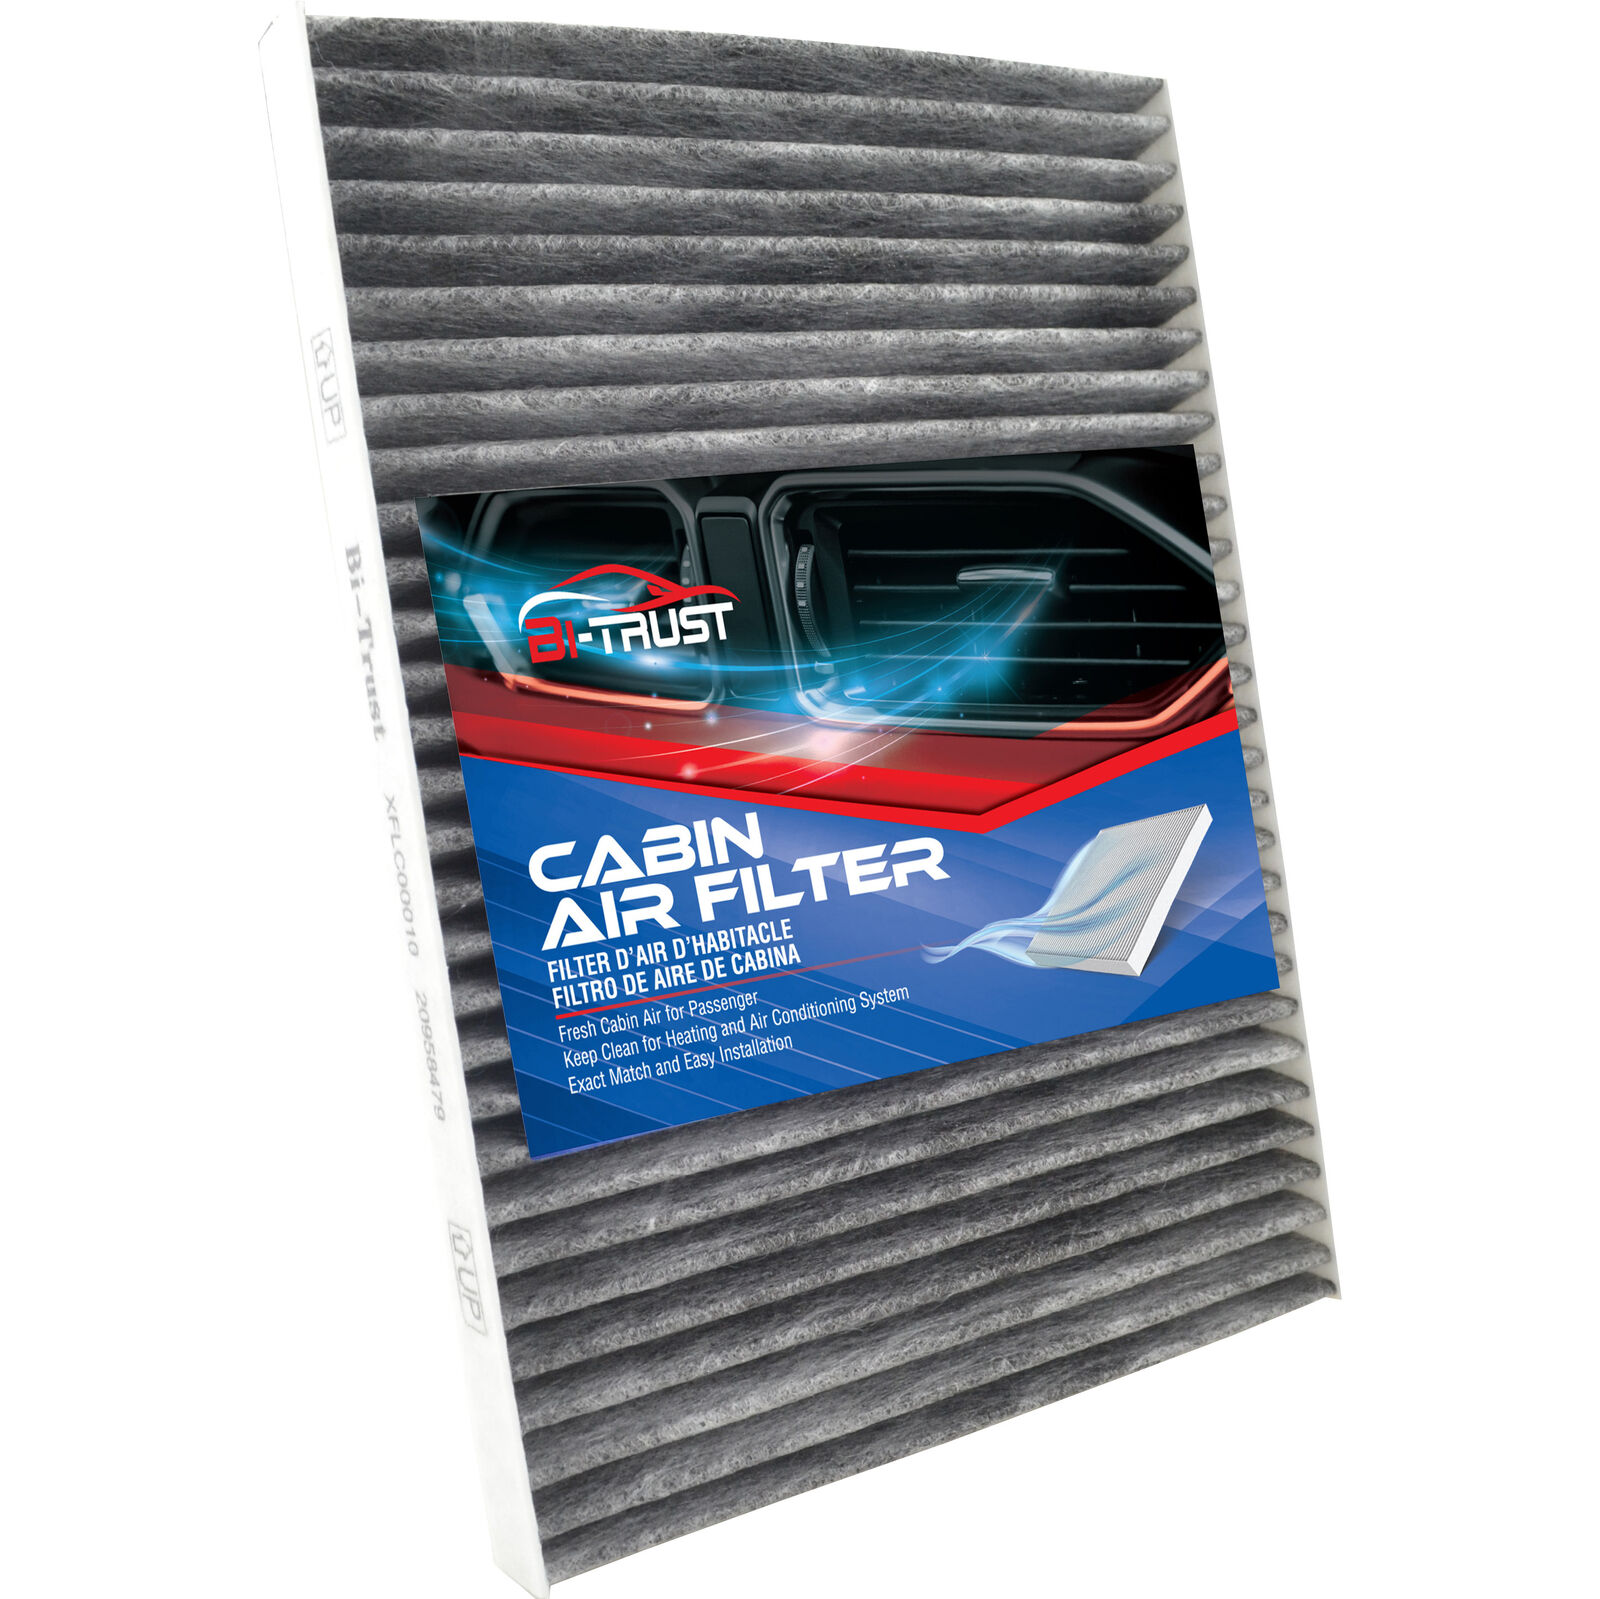 Cabin Air Filter for Chevrolet Traverse Buick Enclave GMC Acadia Saturn Outlook